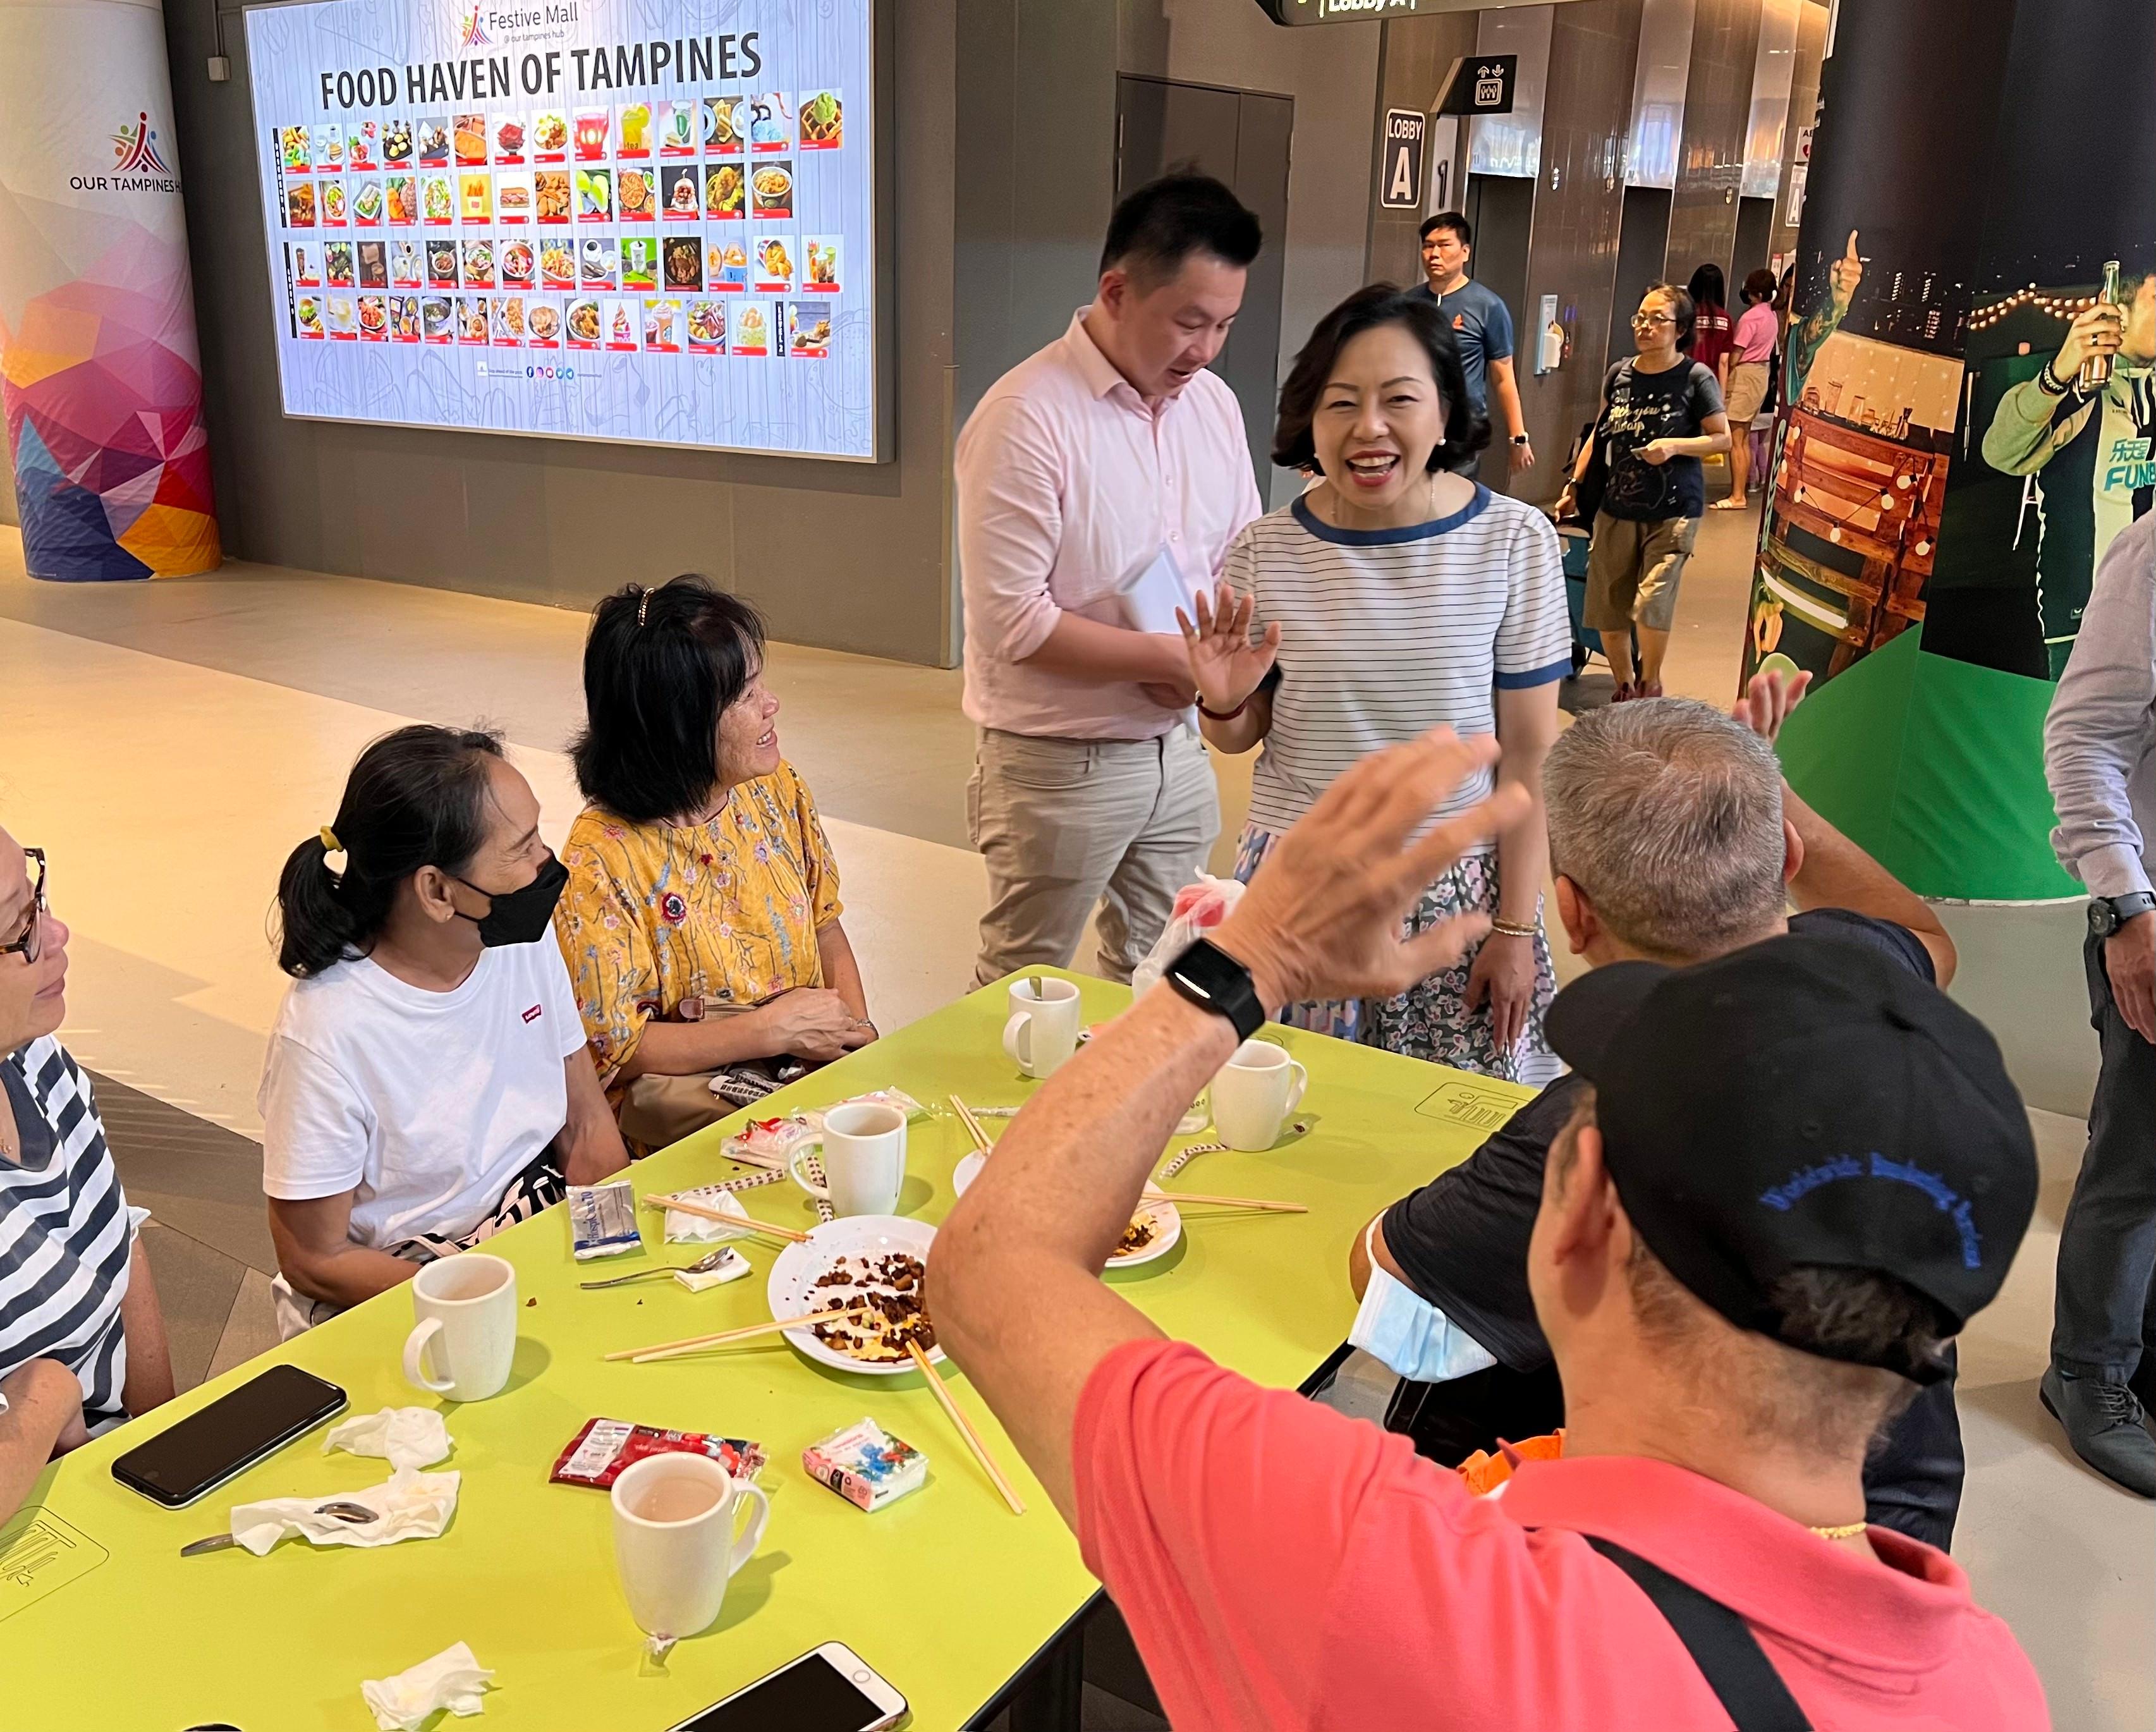 The Secretary for Home and Youth Affairs, Miss Alice Mak (third right), today (February 18) visited Our Tampines Hub, a community and leisure complex in Singapore, and chatted with the members of the public there.